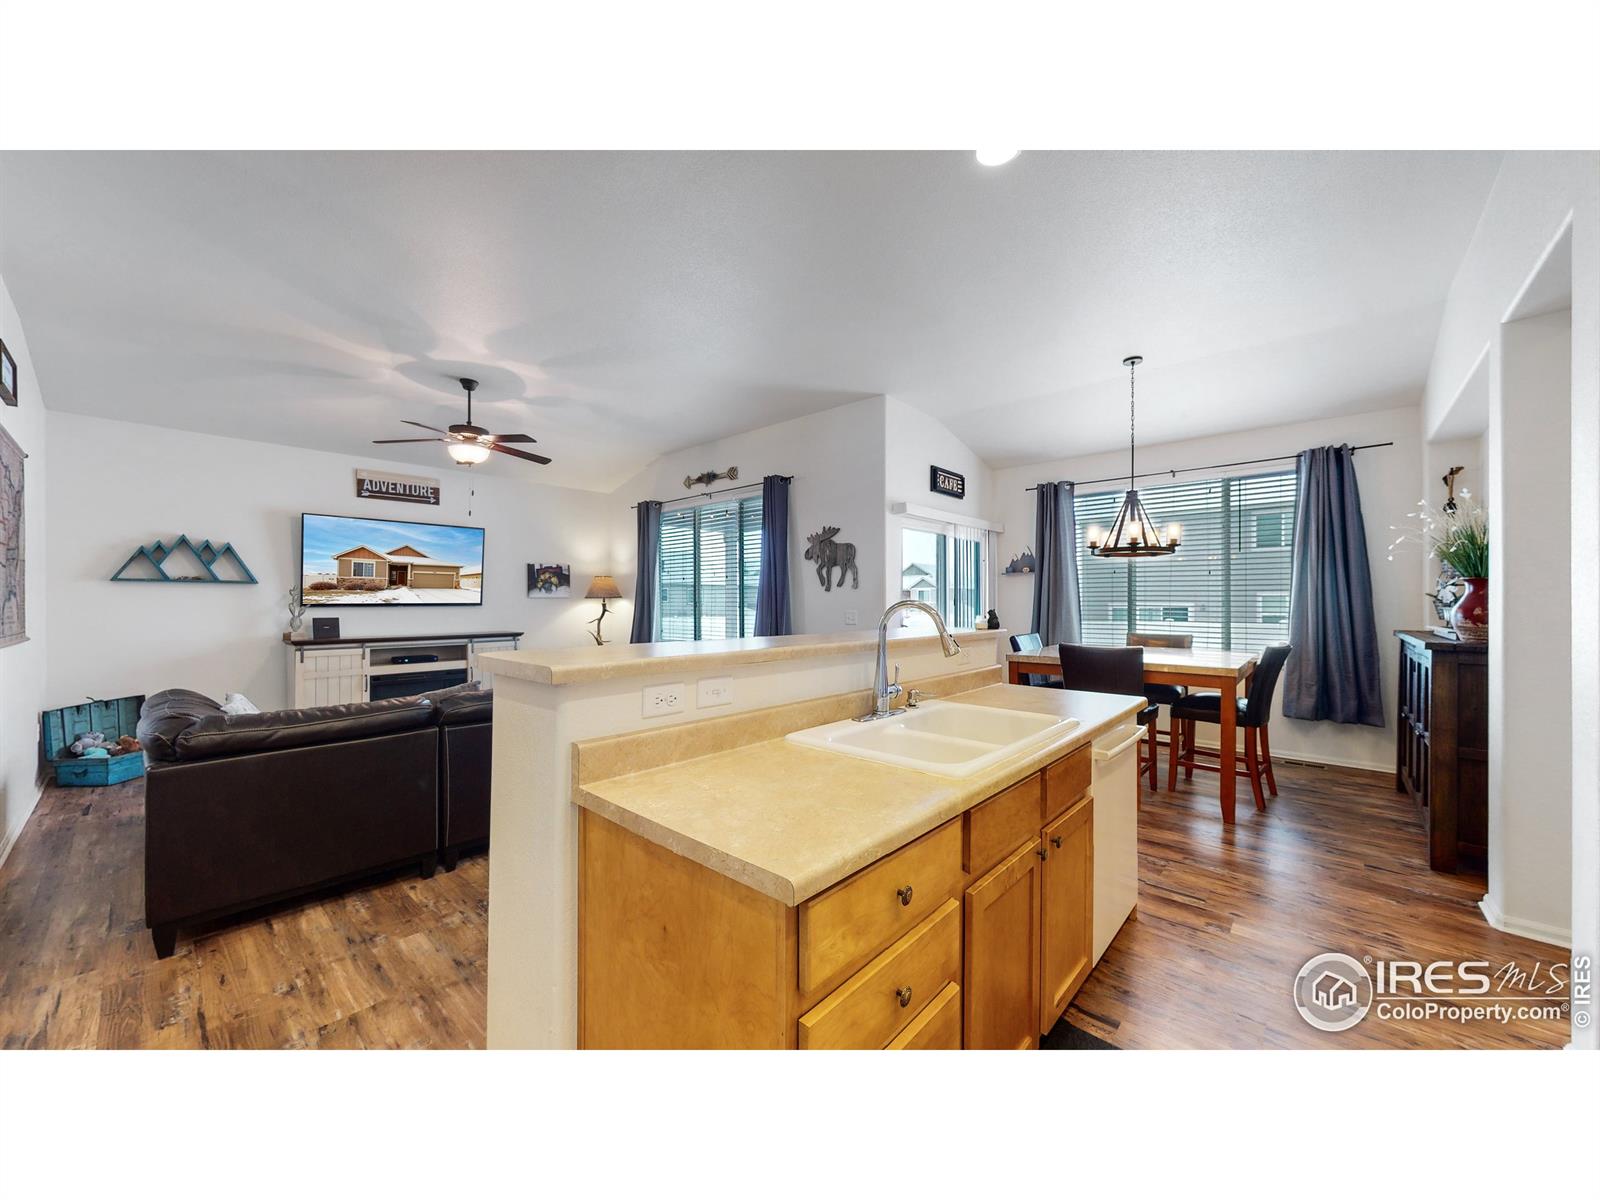 2271 75th, Greeley, CO